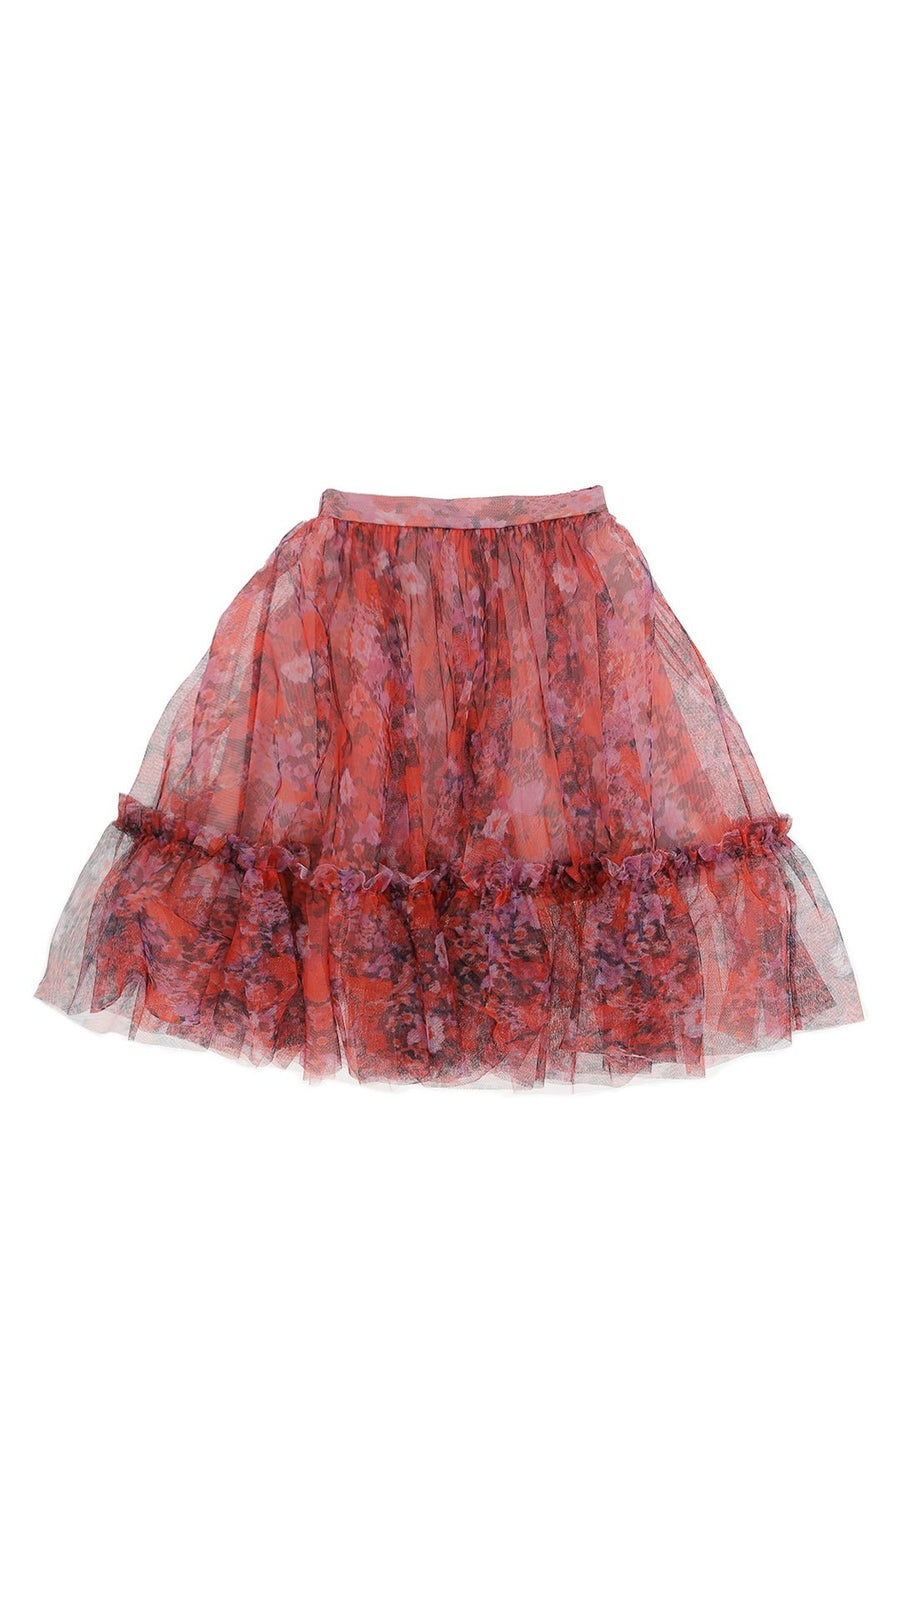 All Over Printed Tulle Skirt - Multicolor - Posh New York